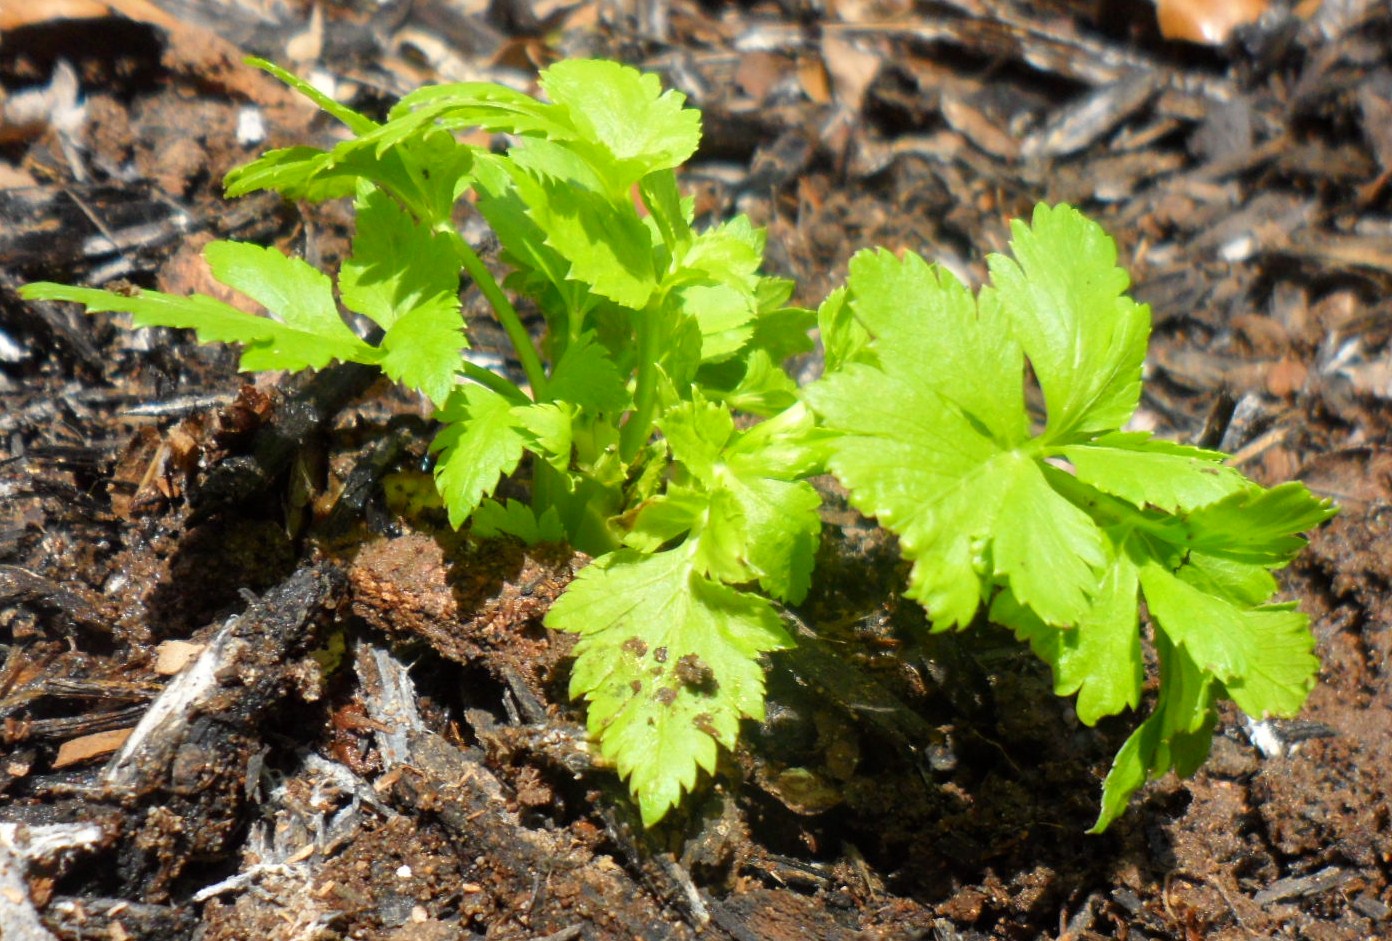 Here is the celery just after it was planted in the ground.